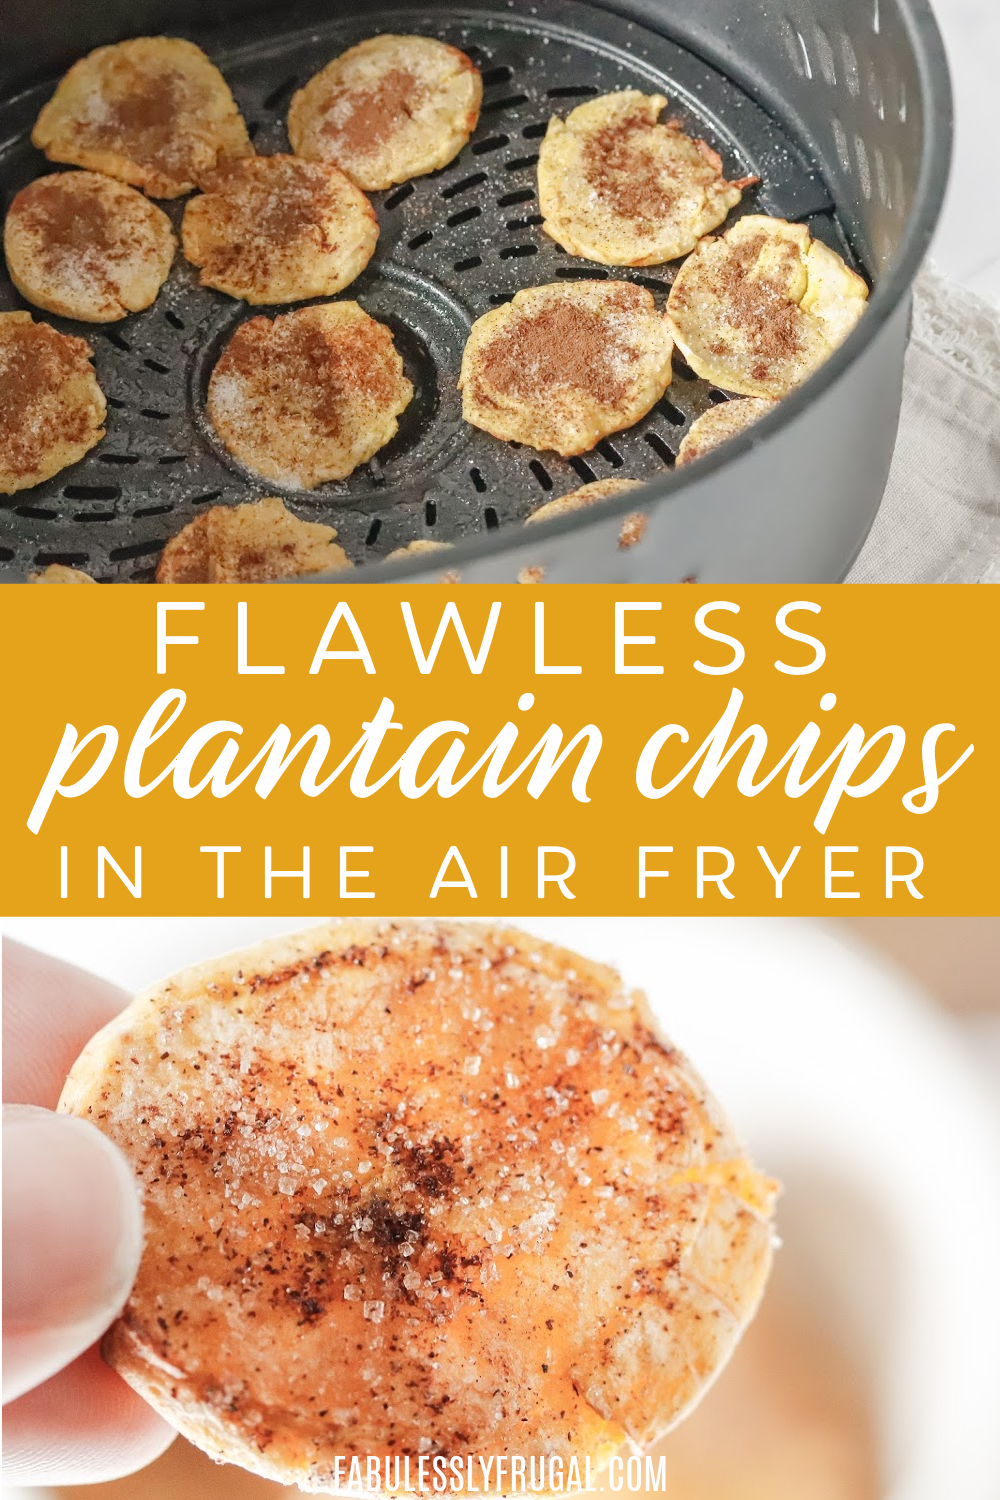 Have you made plantain chips in the air fryer? This air fryer recipe is one of the best ones out there that everyone will love!